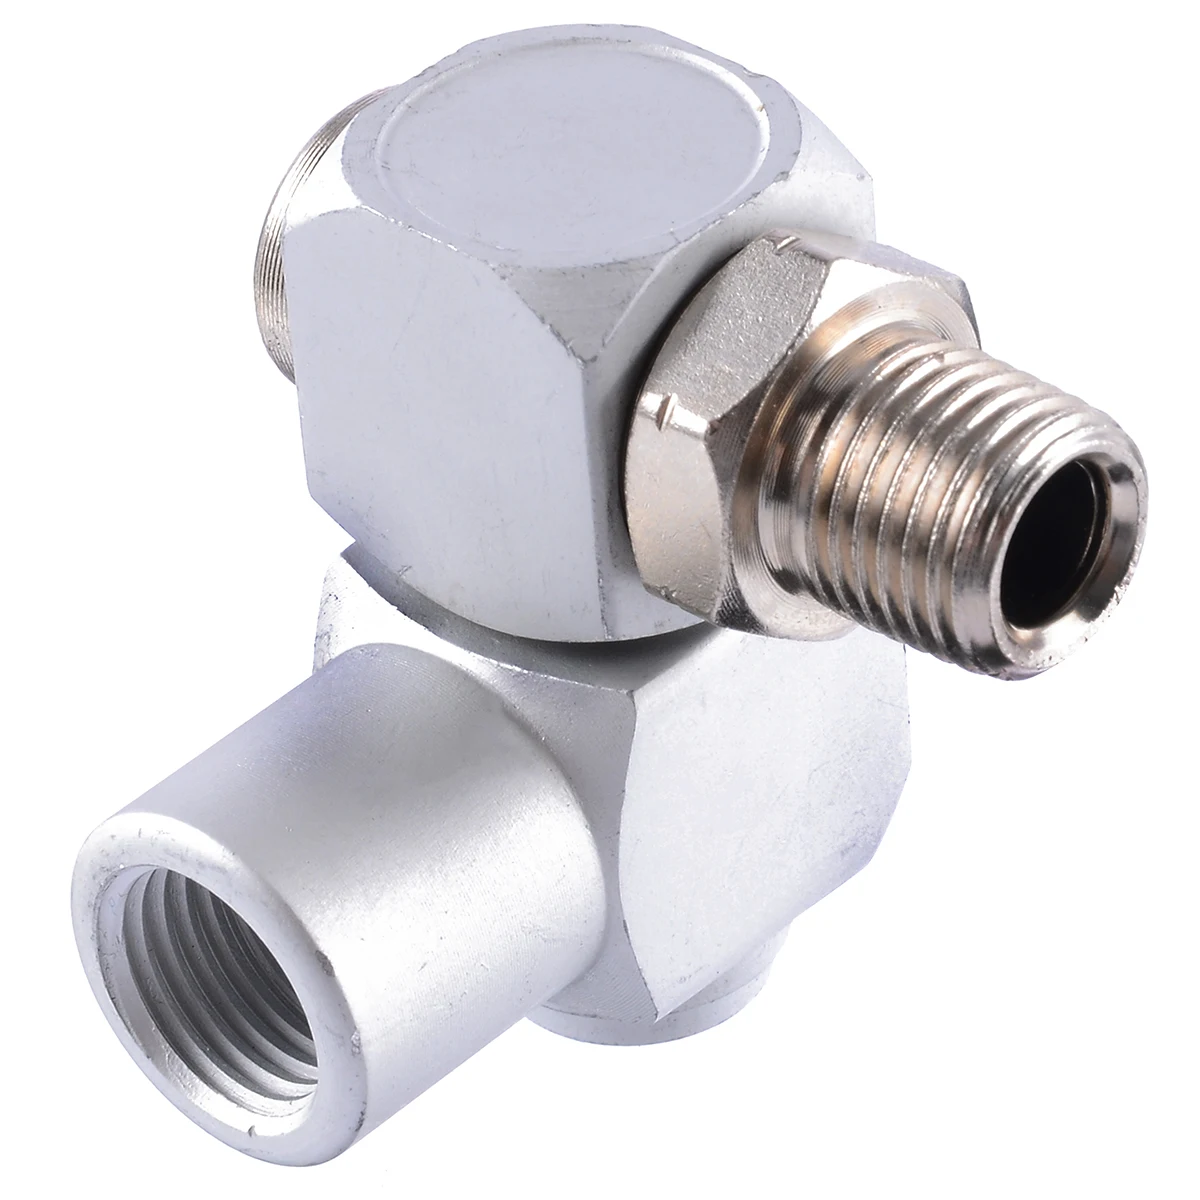 1/4 Inch Swivel Air Hose Connector Adapter Joint Pneumatic Conversion Aluminum 